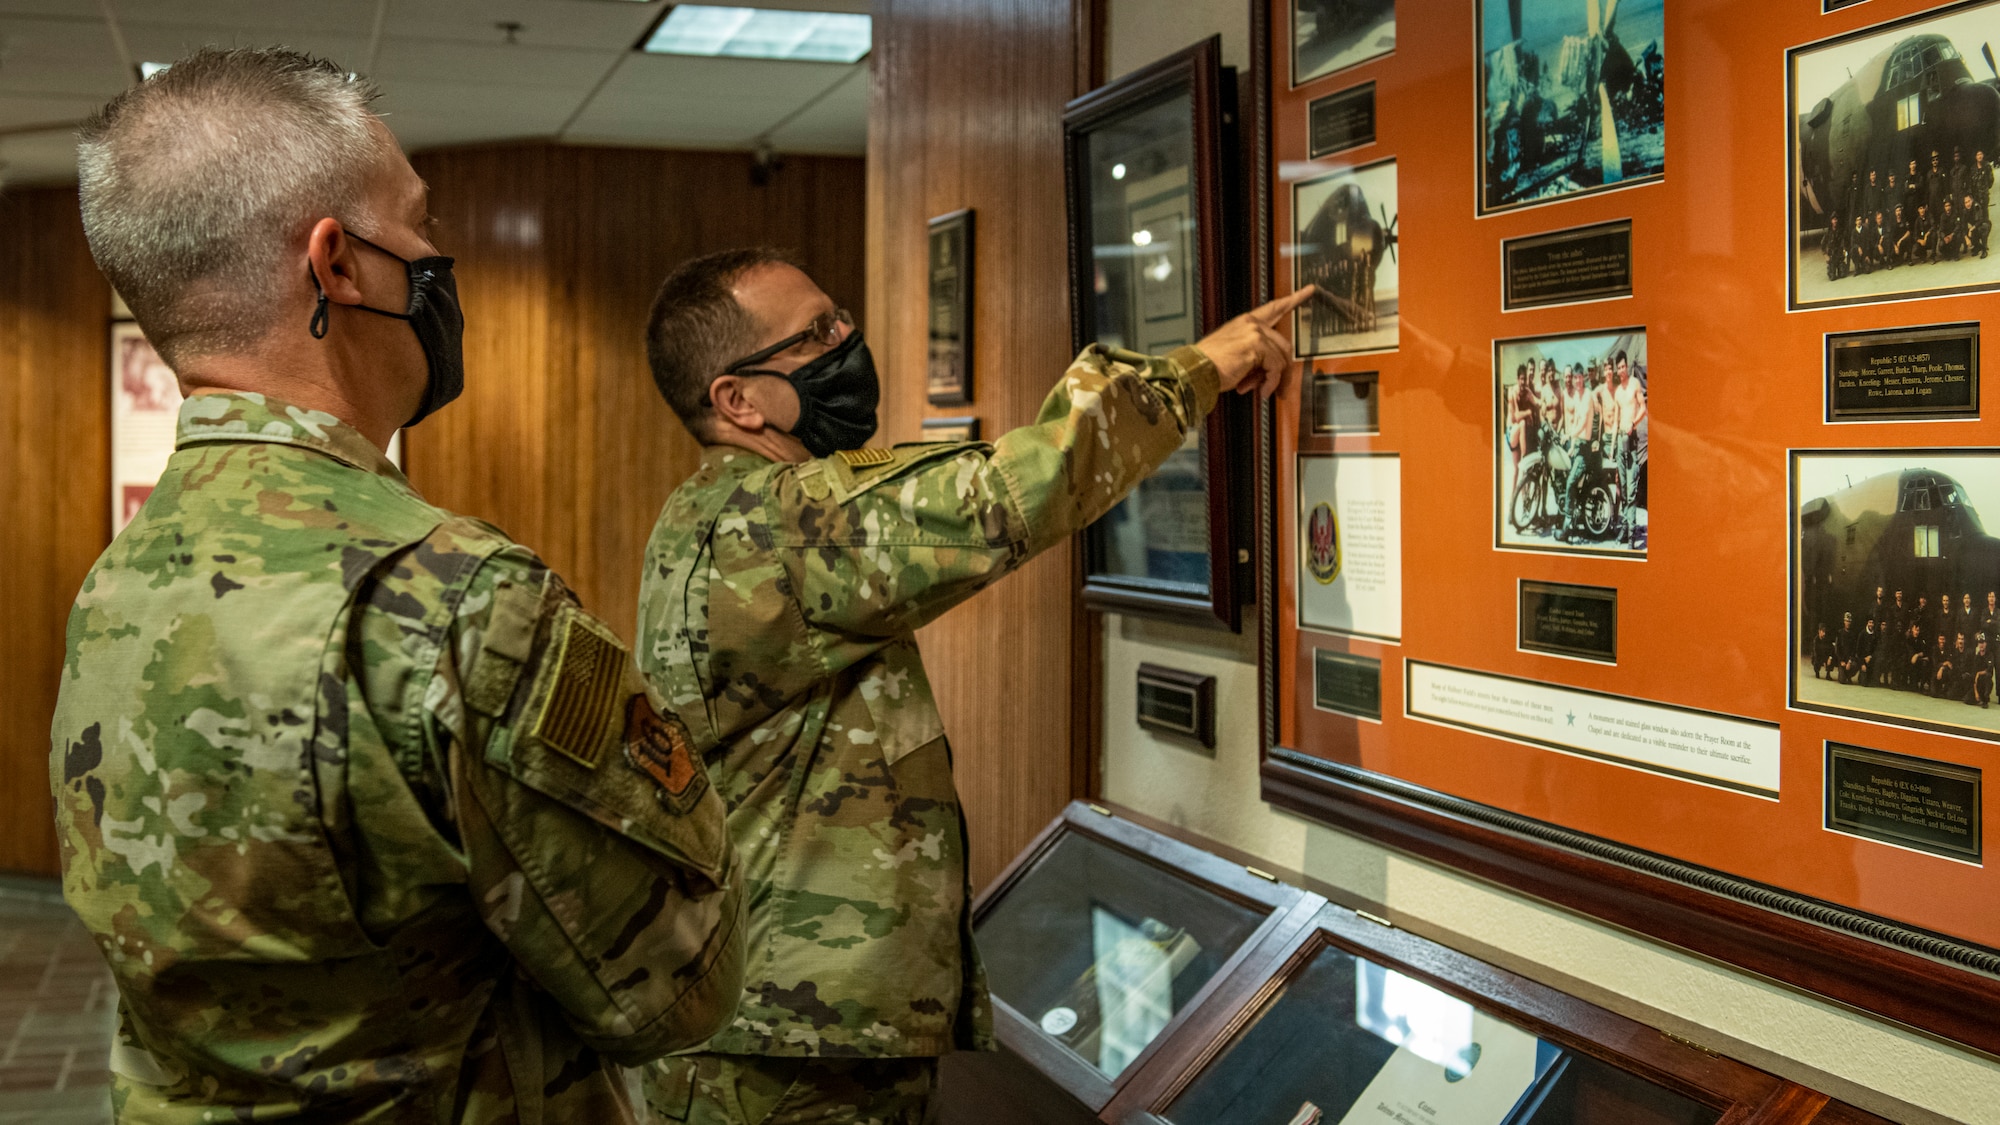 Two Airmen in uniform point at a photo on a wall.